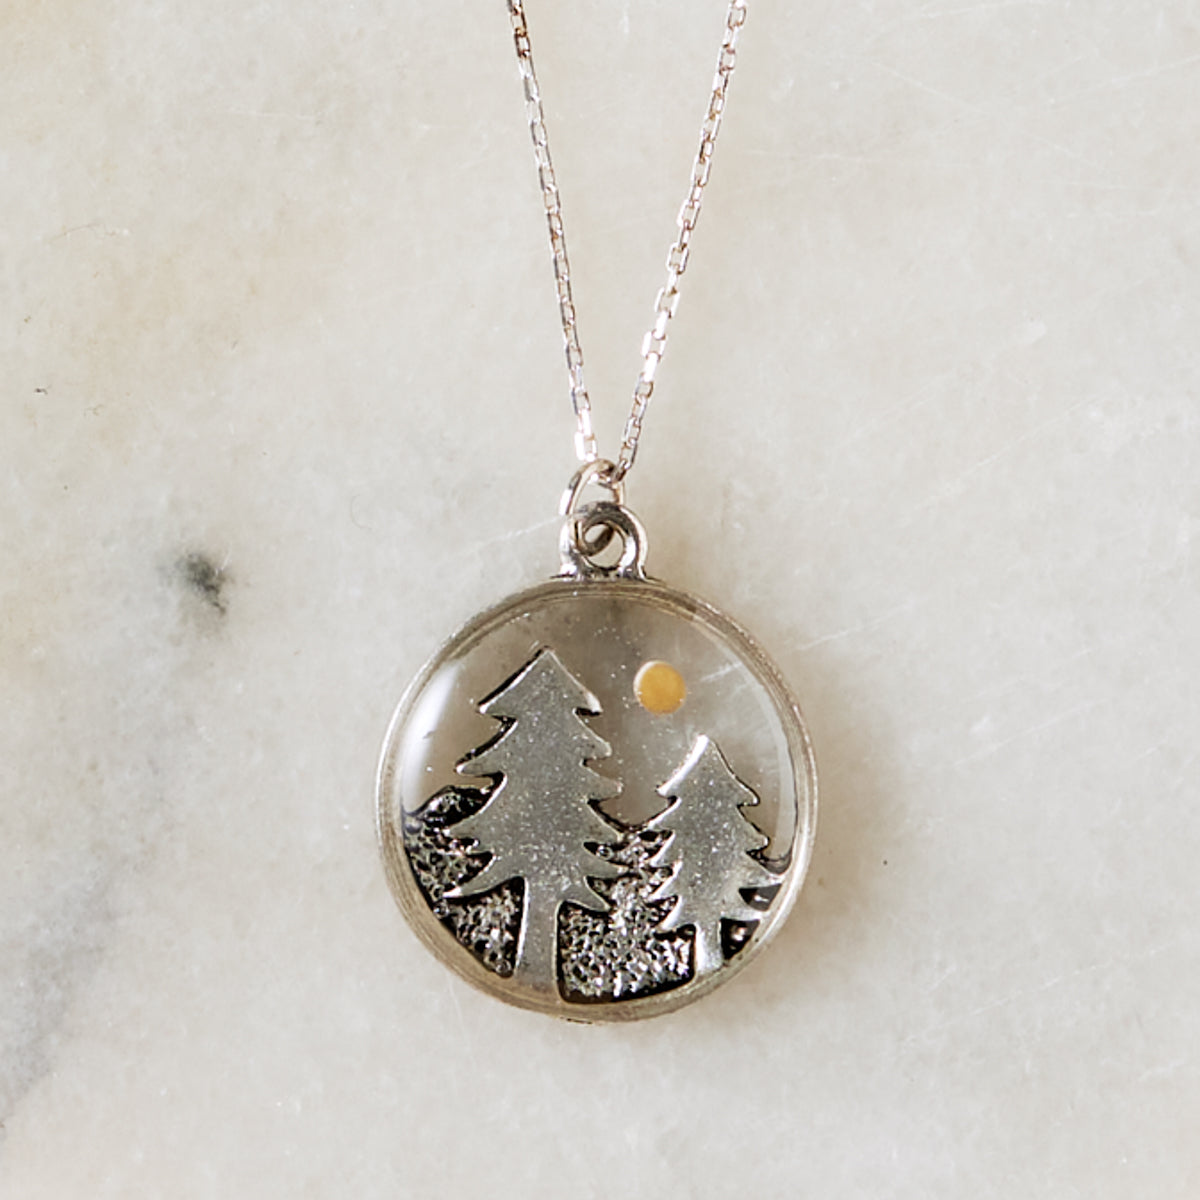 Mustard Seed Forest Necklace